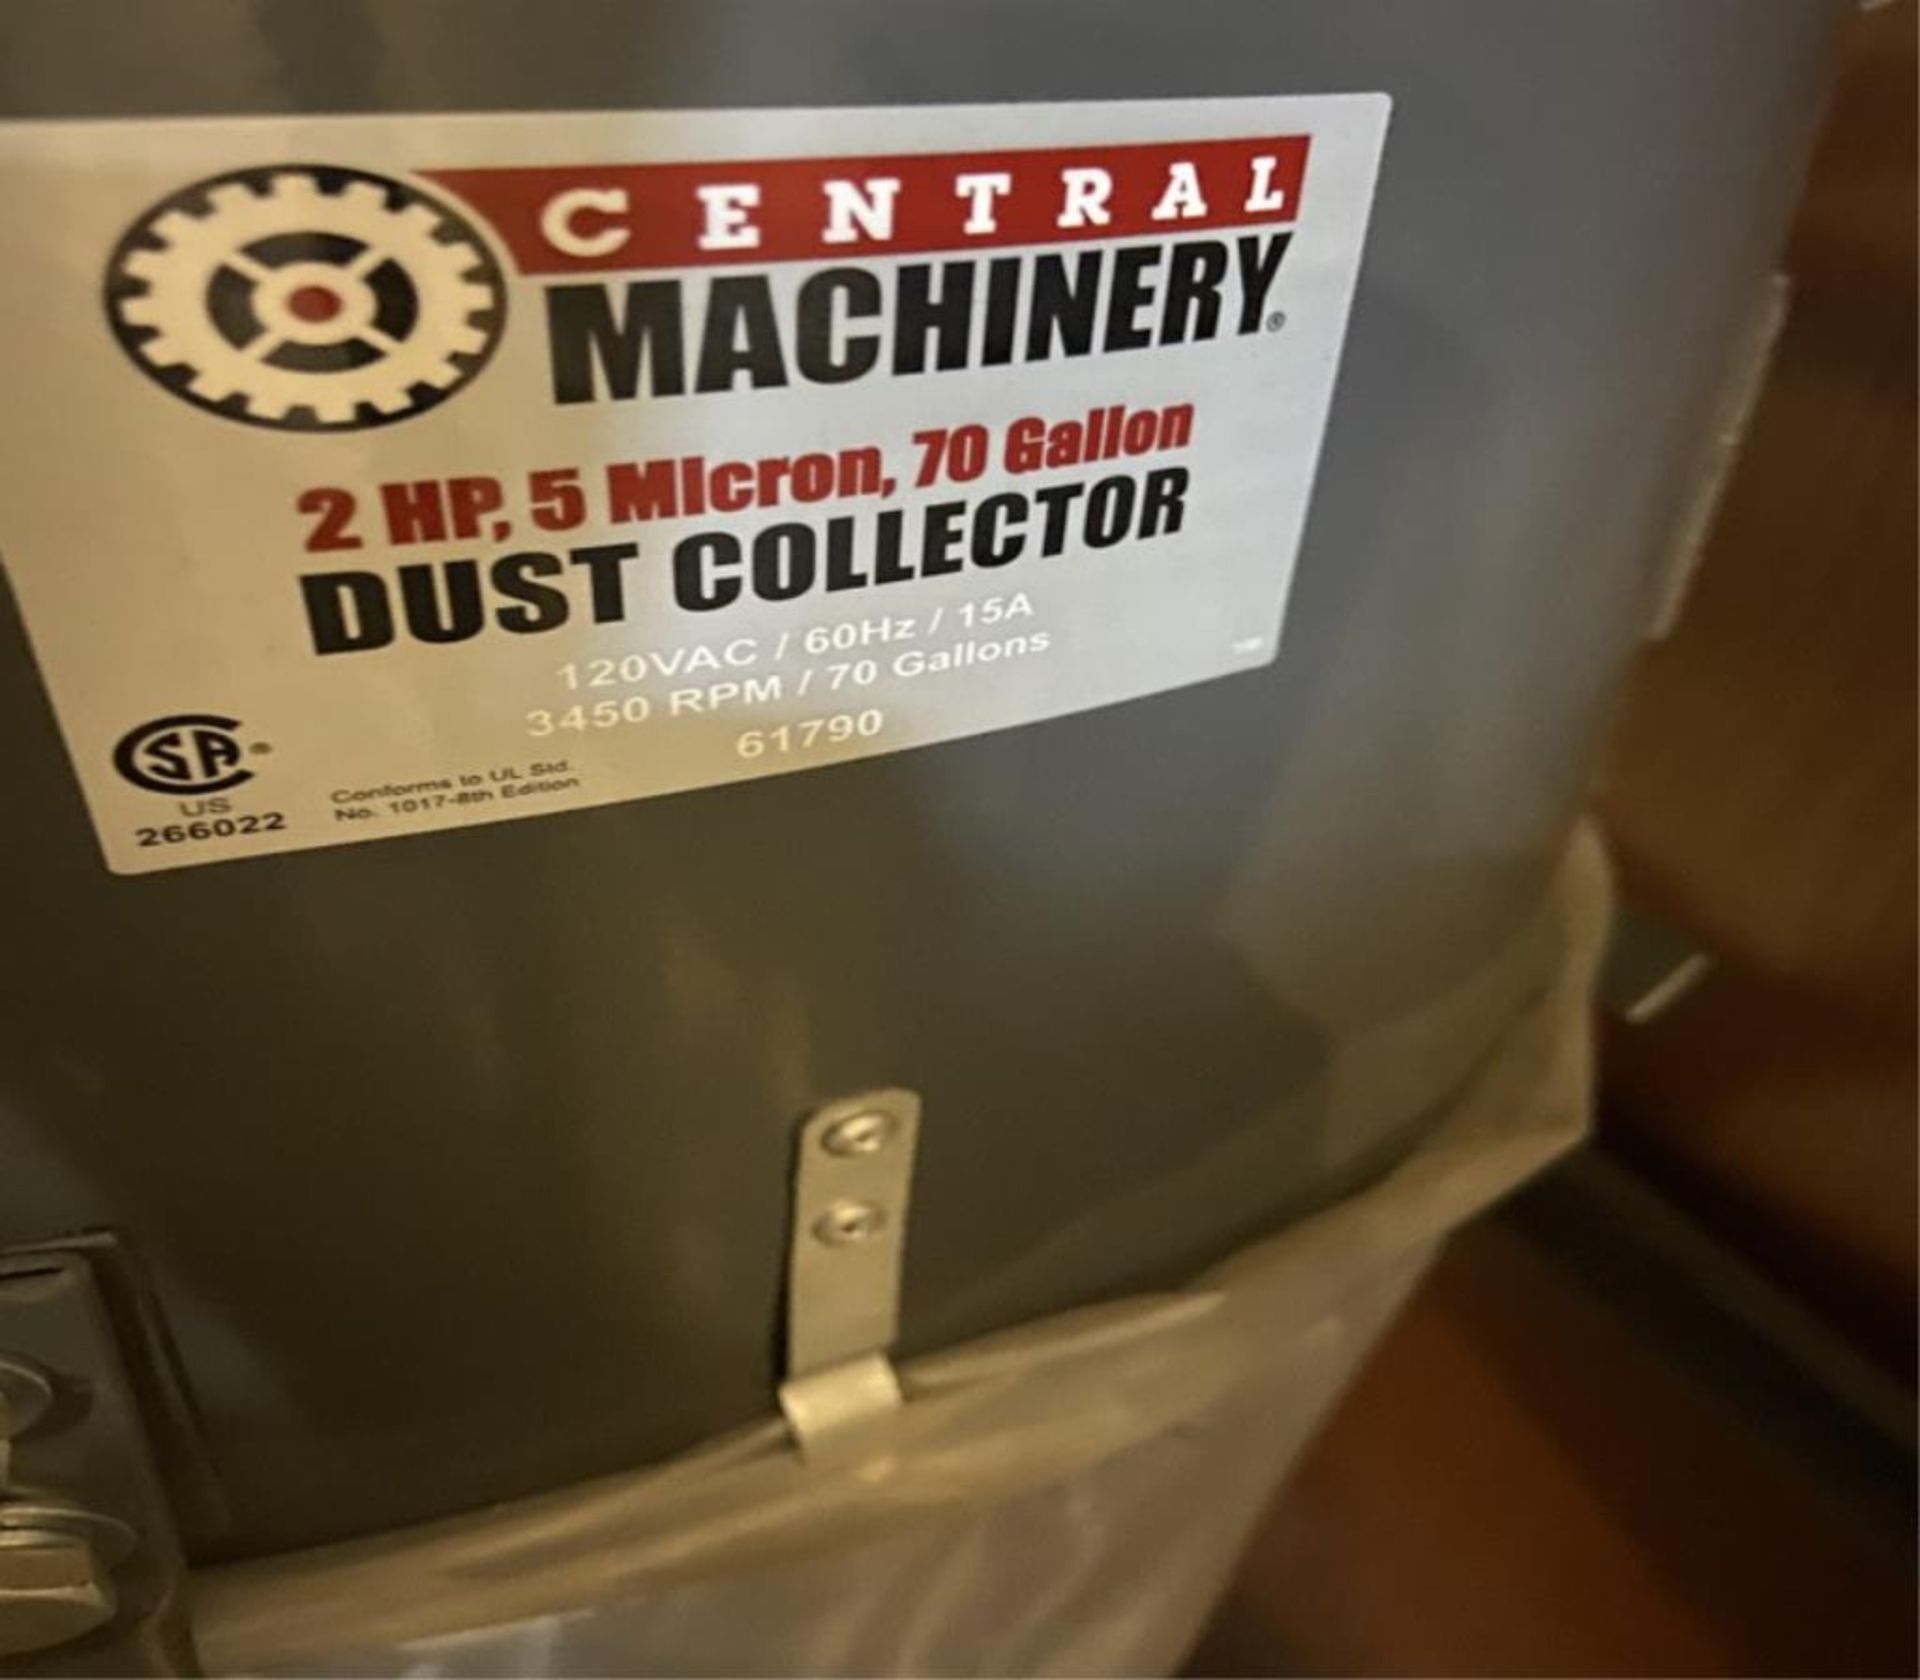 Central Machinery Dust Collector - New - Image 2 of 2